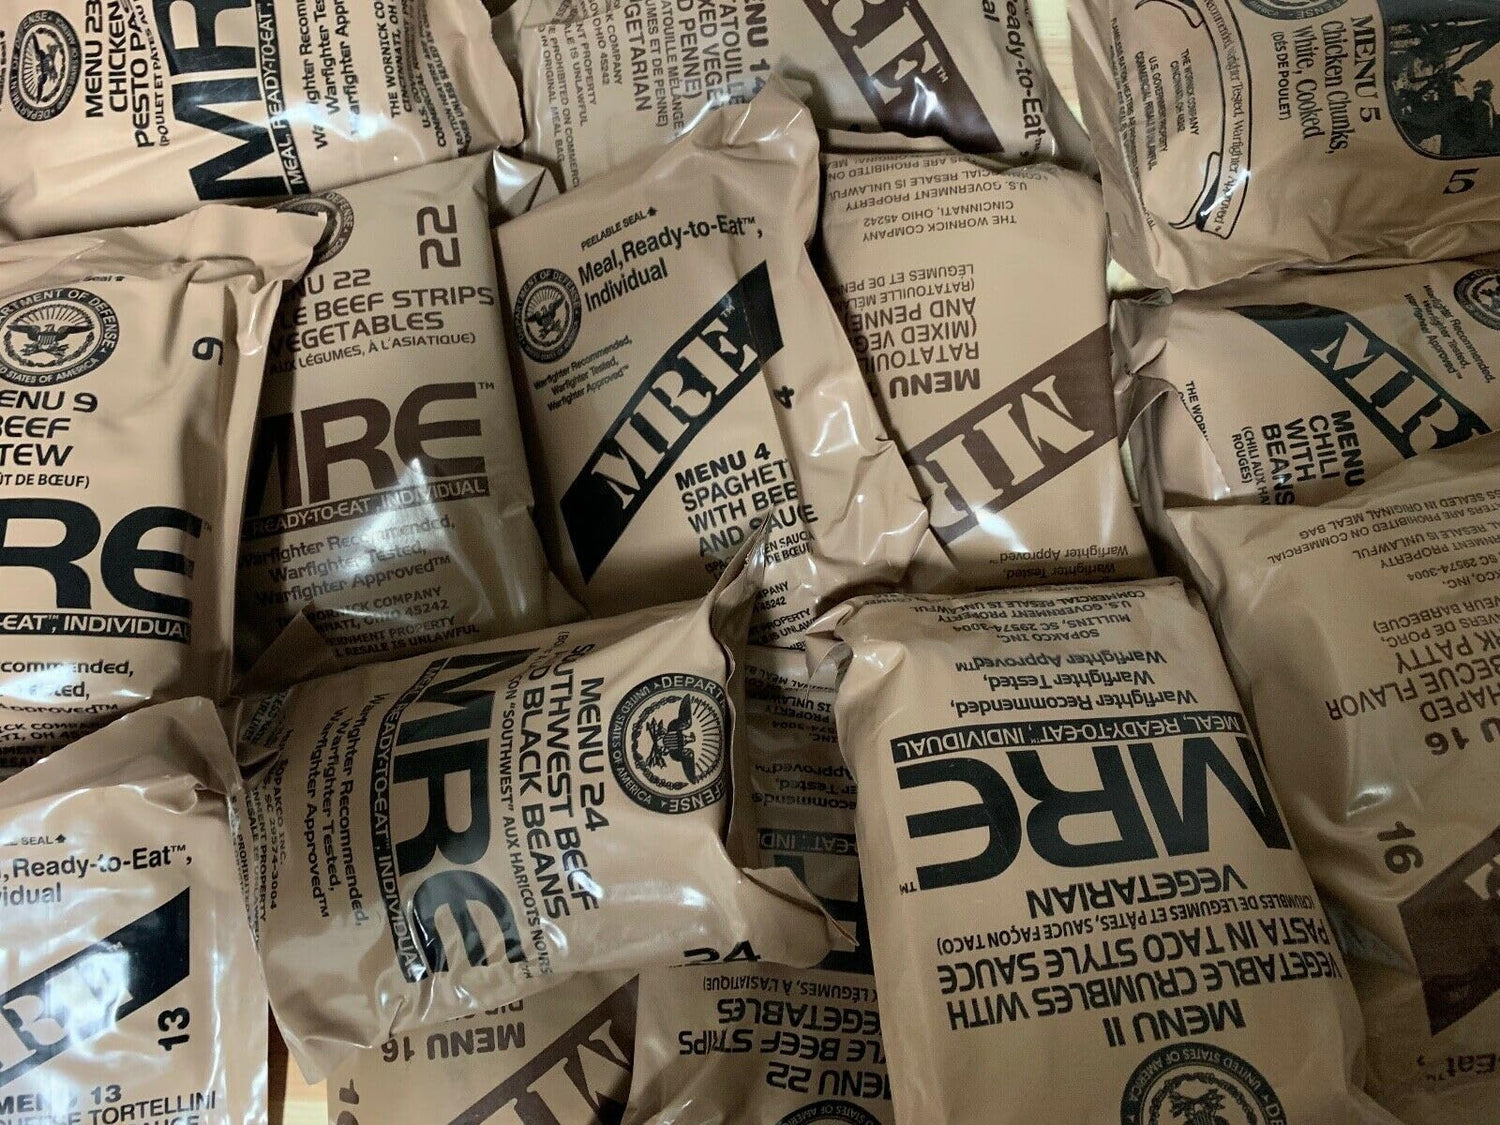 MEALS READY TO EAT (MRES)